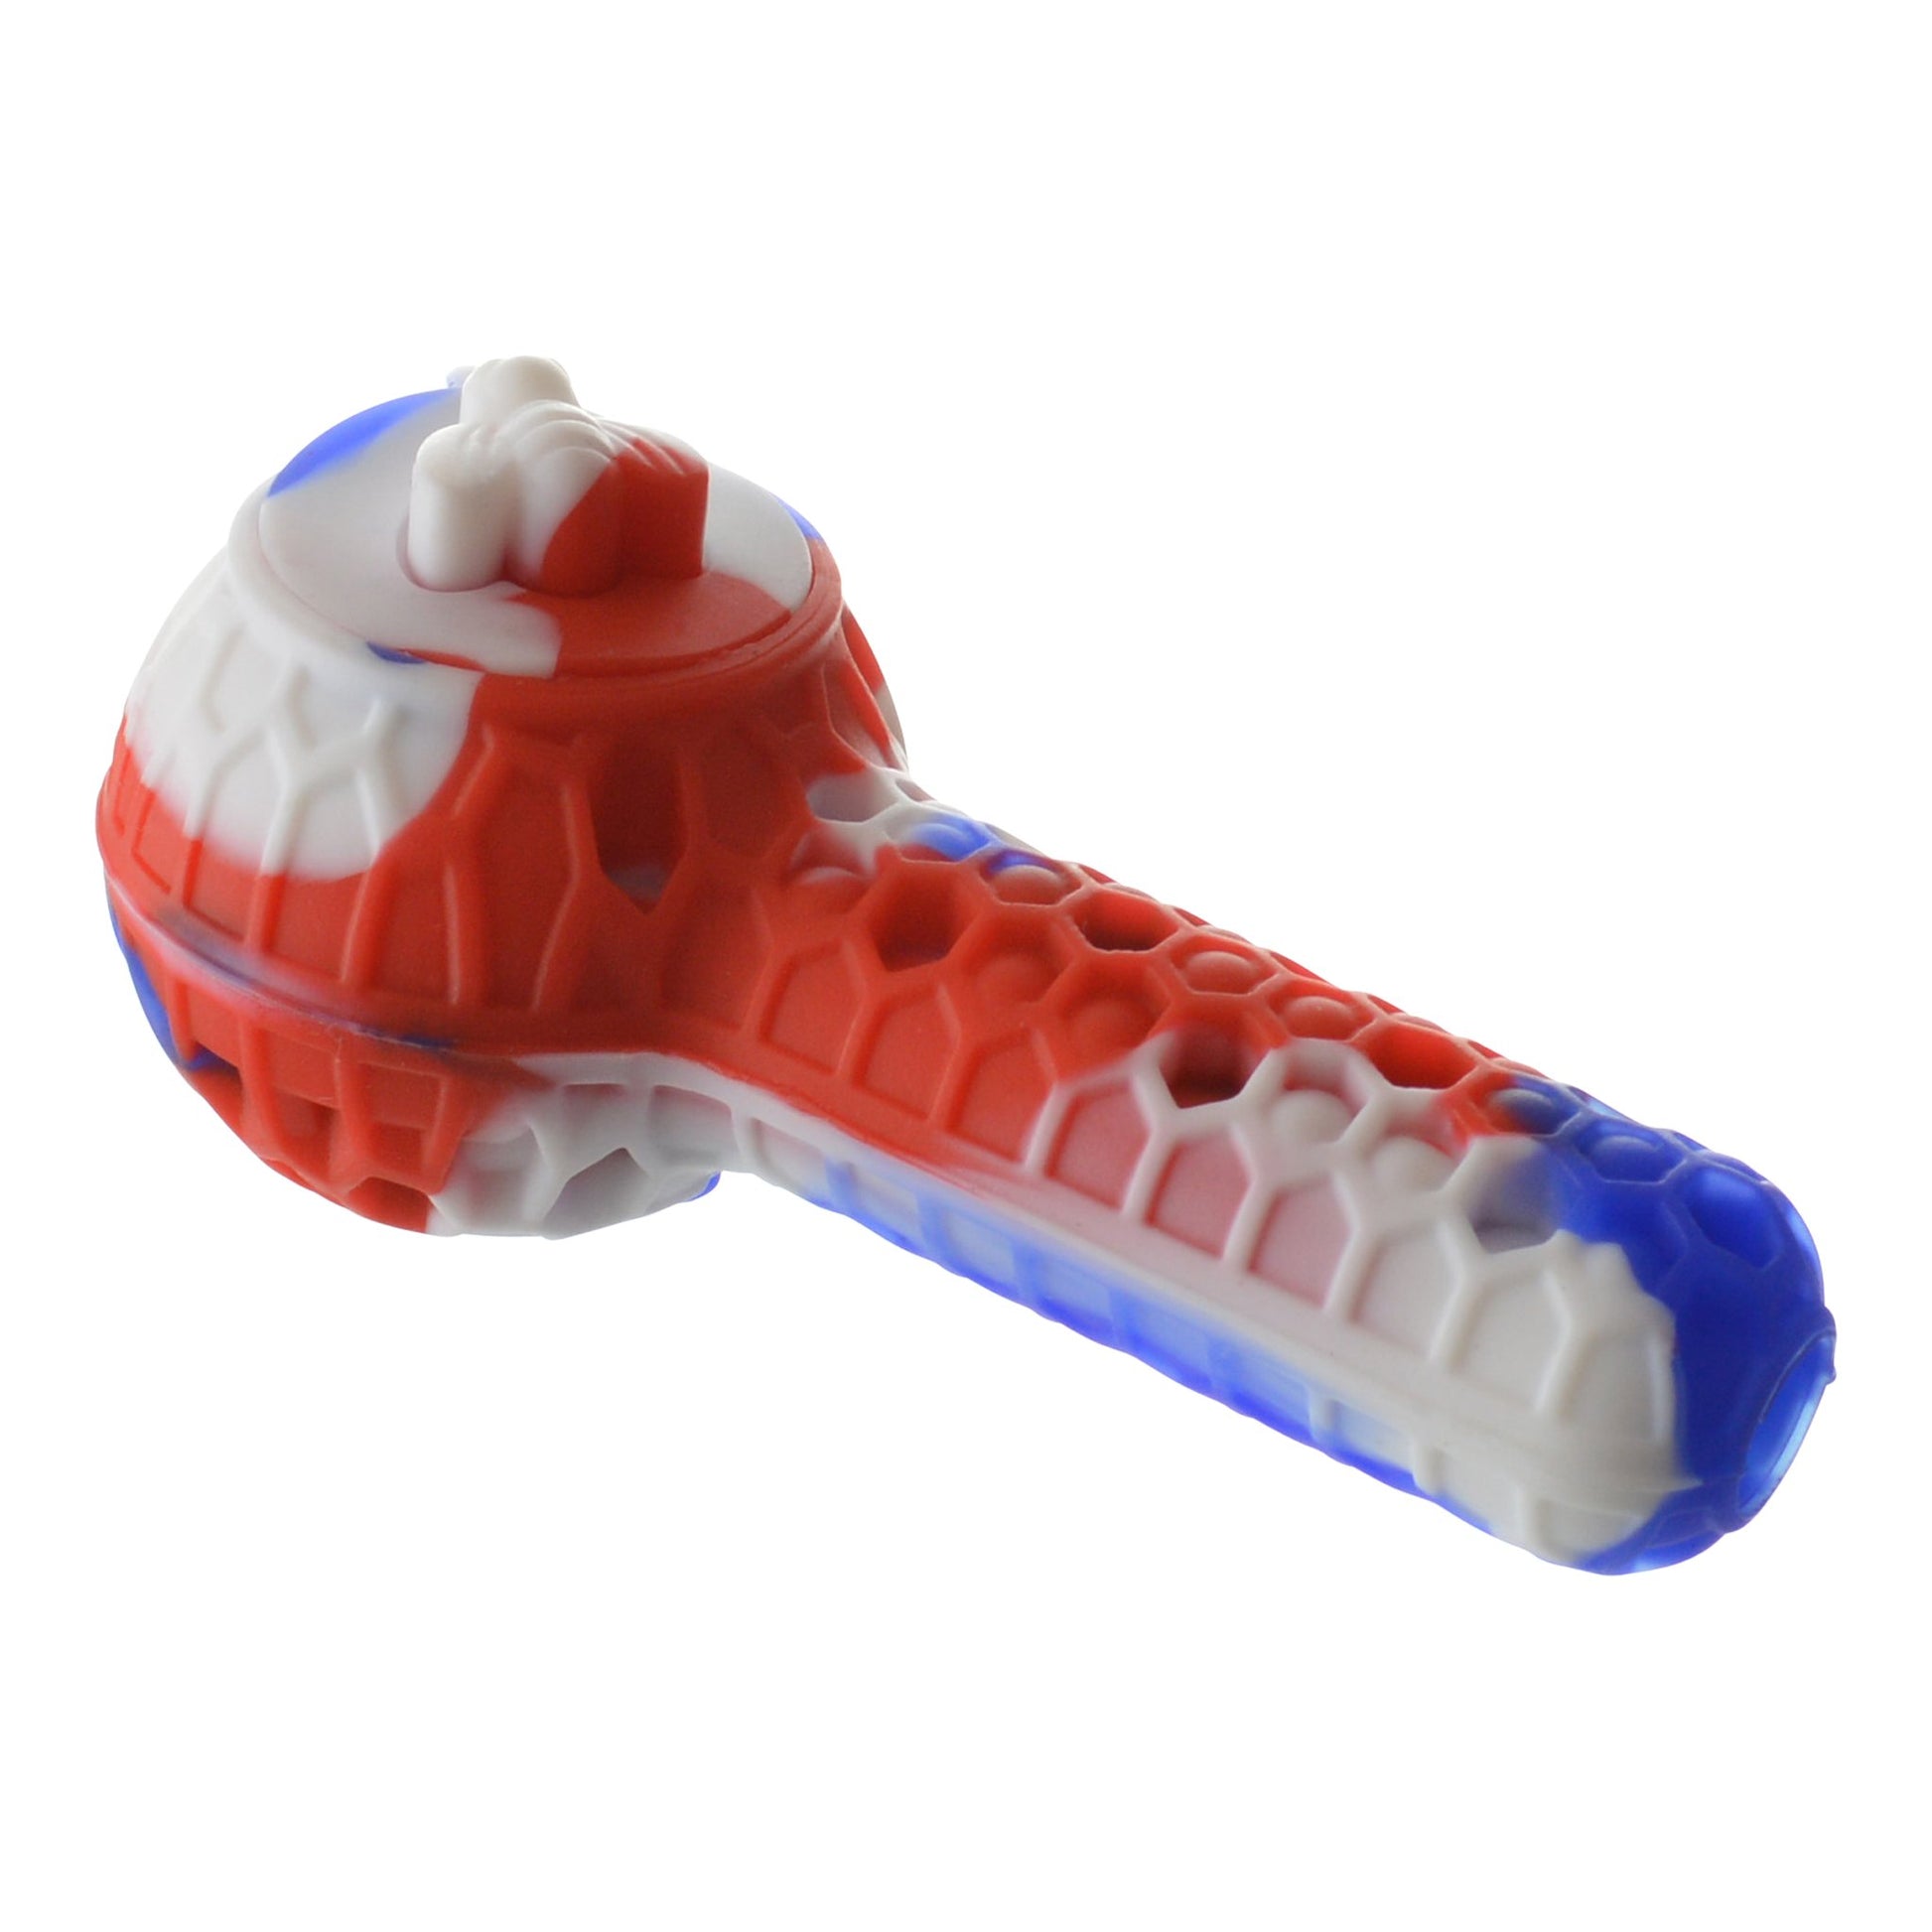 2 in 1 Silicone Pipe - 4.5in Red / Blue